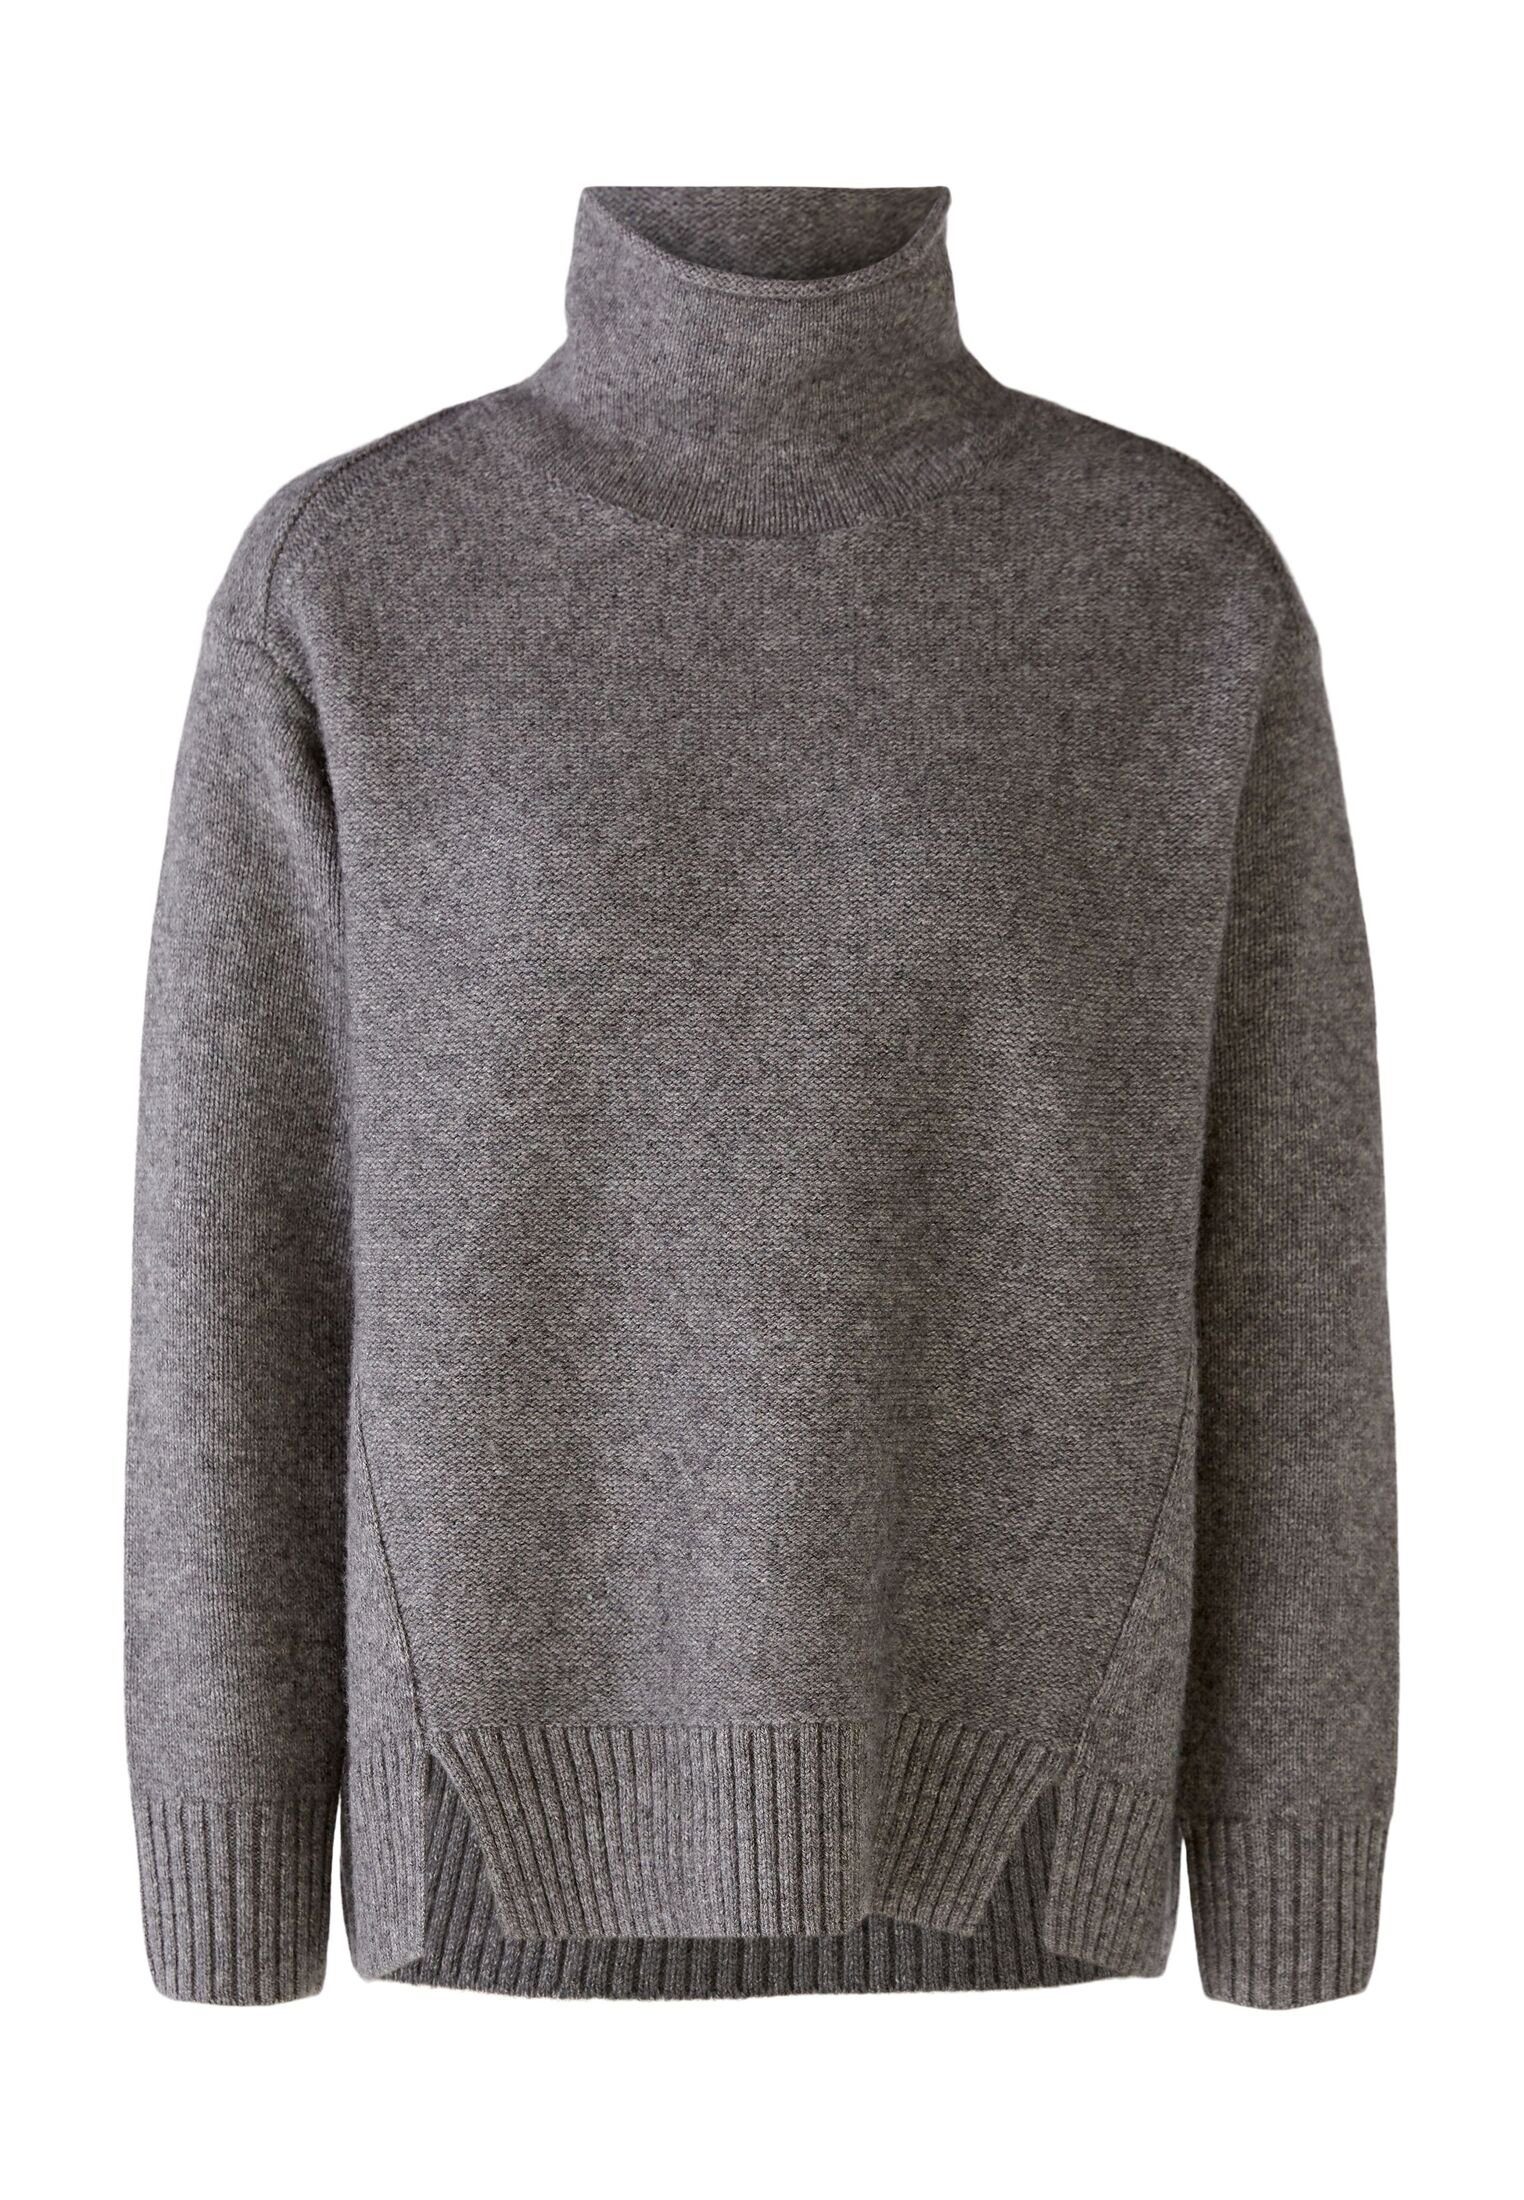 Oui Strickpullover Pullover grey Wollmischung